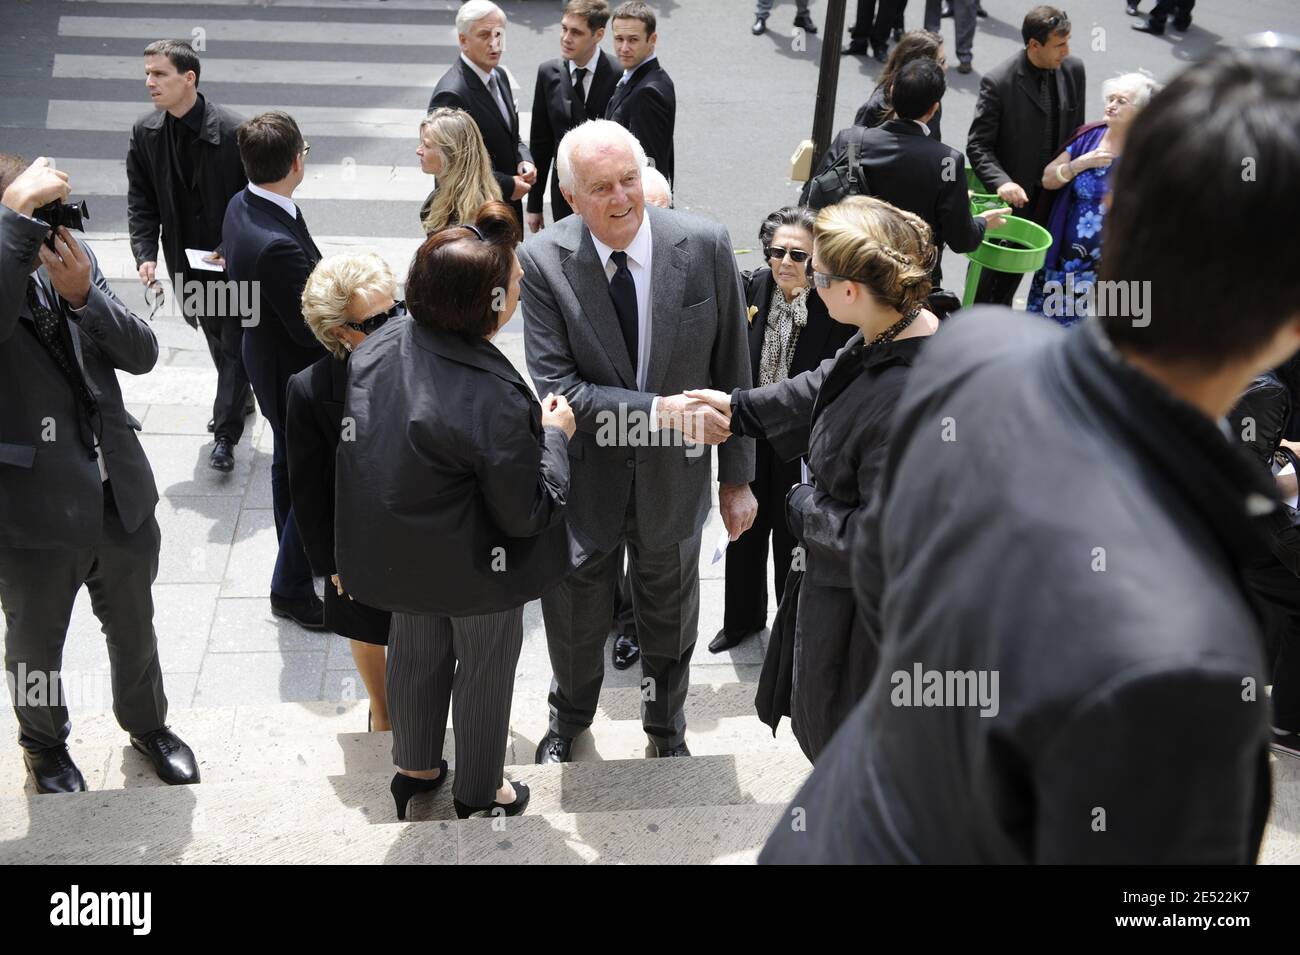 Hubert de Givenchy arriving at the Saint-Roch church in Paris, France, Thursday, June 5, 2008, for the funeral of French designer Yves Saint Laurent, who died aged 71, Sunday evening. Photo by ABACAPRESS.COM Stock Photo